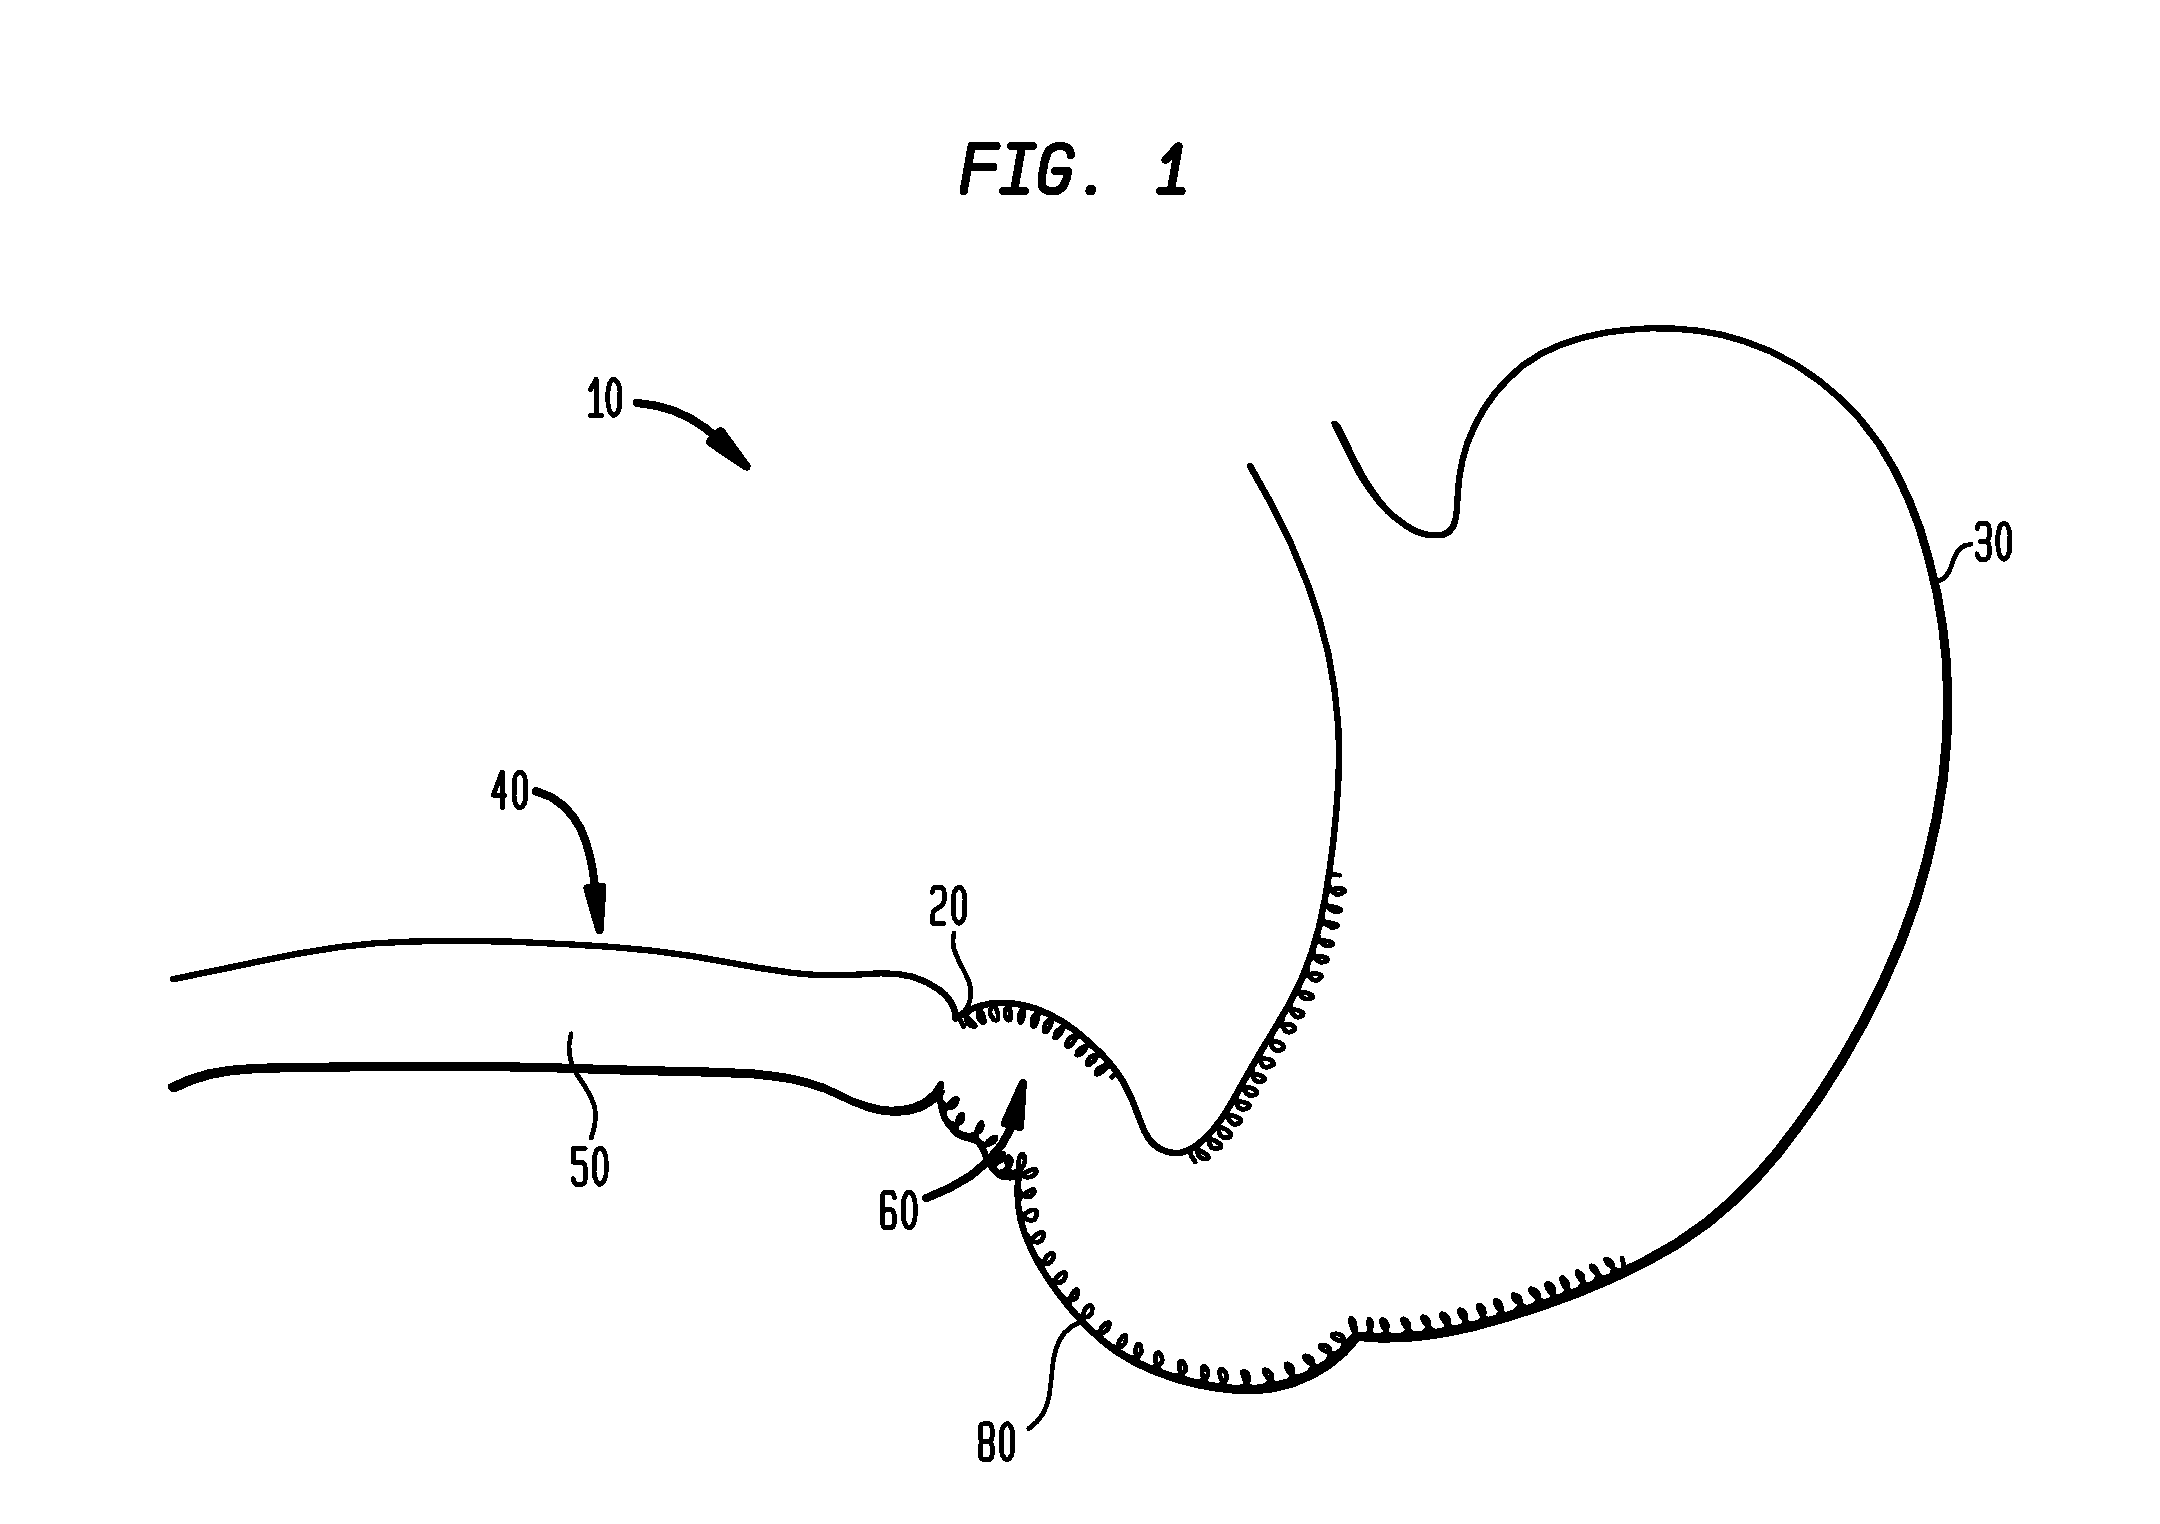 Systems and methods for treating obesity and type 2 diabetes